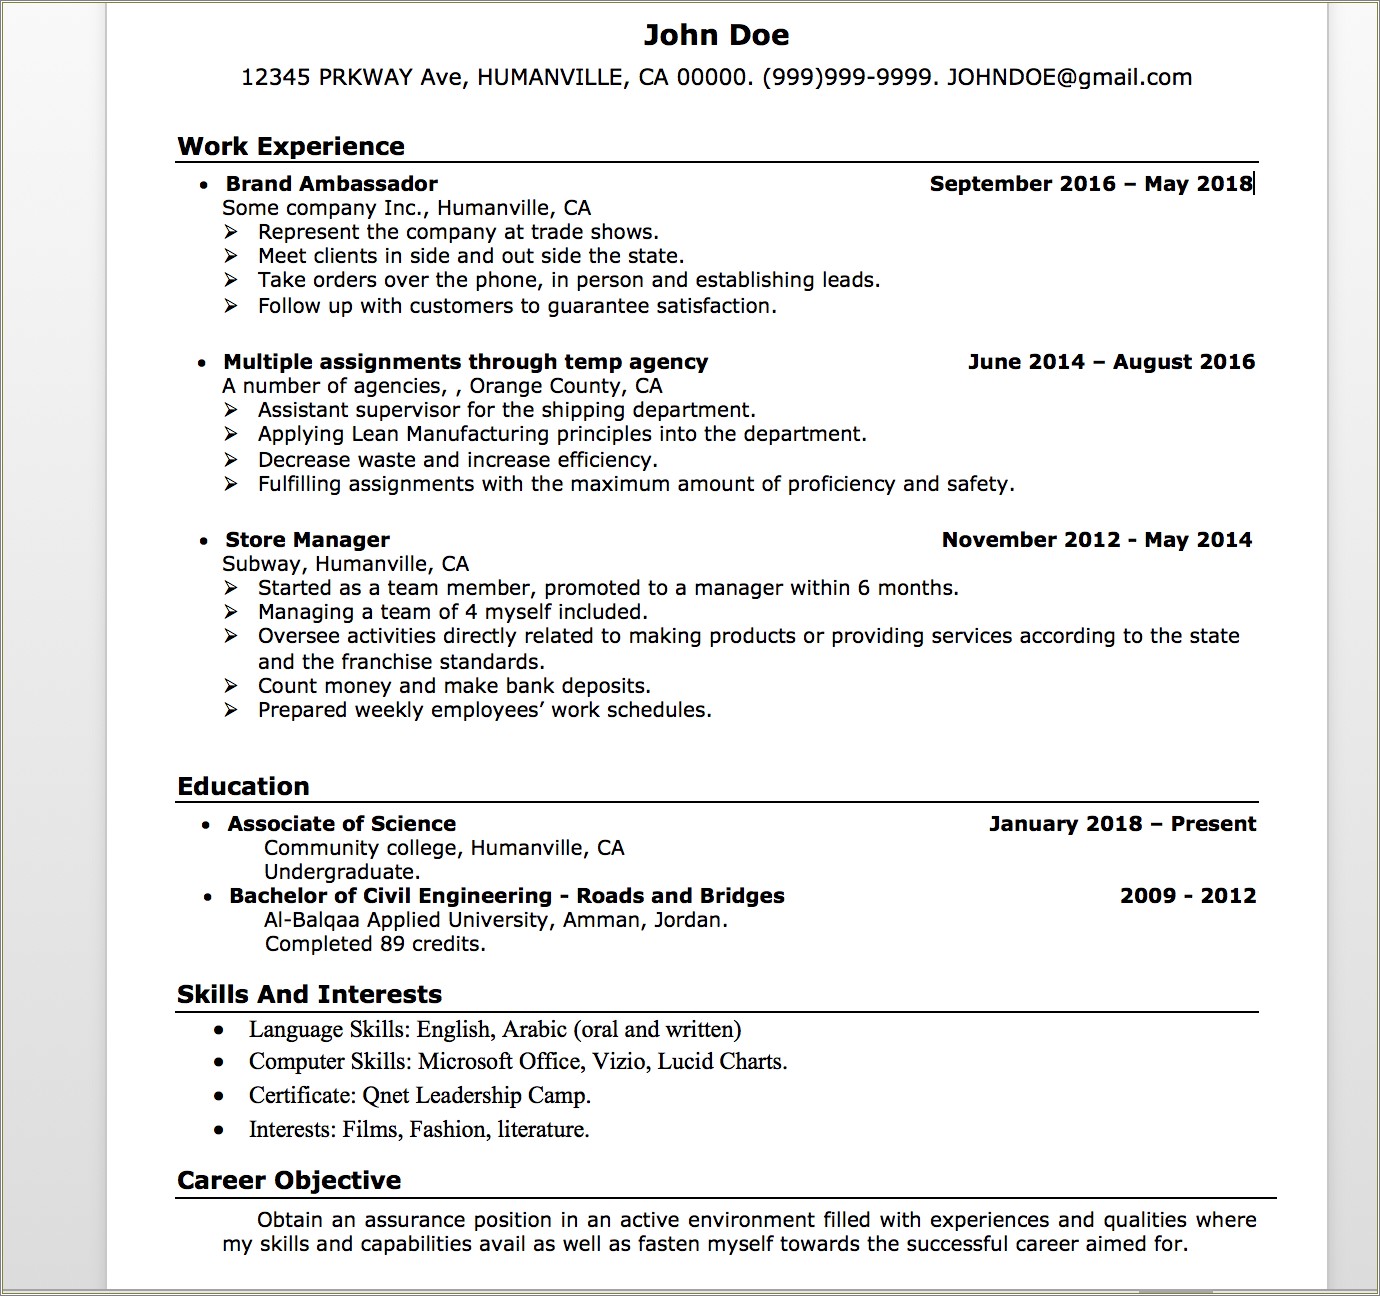 Objectives For Entry Level Resumes In Medical Research